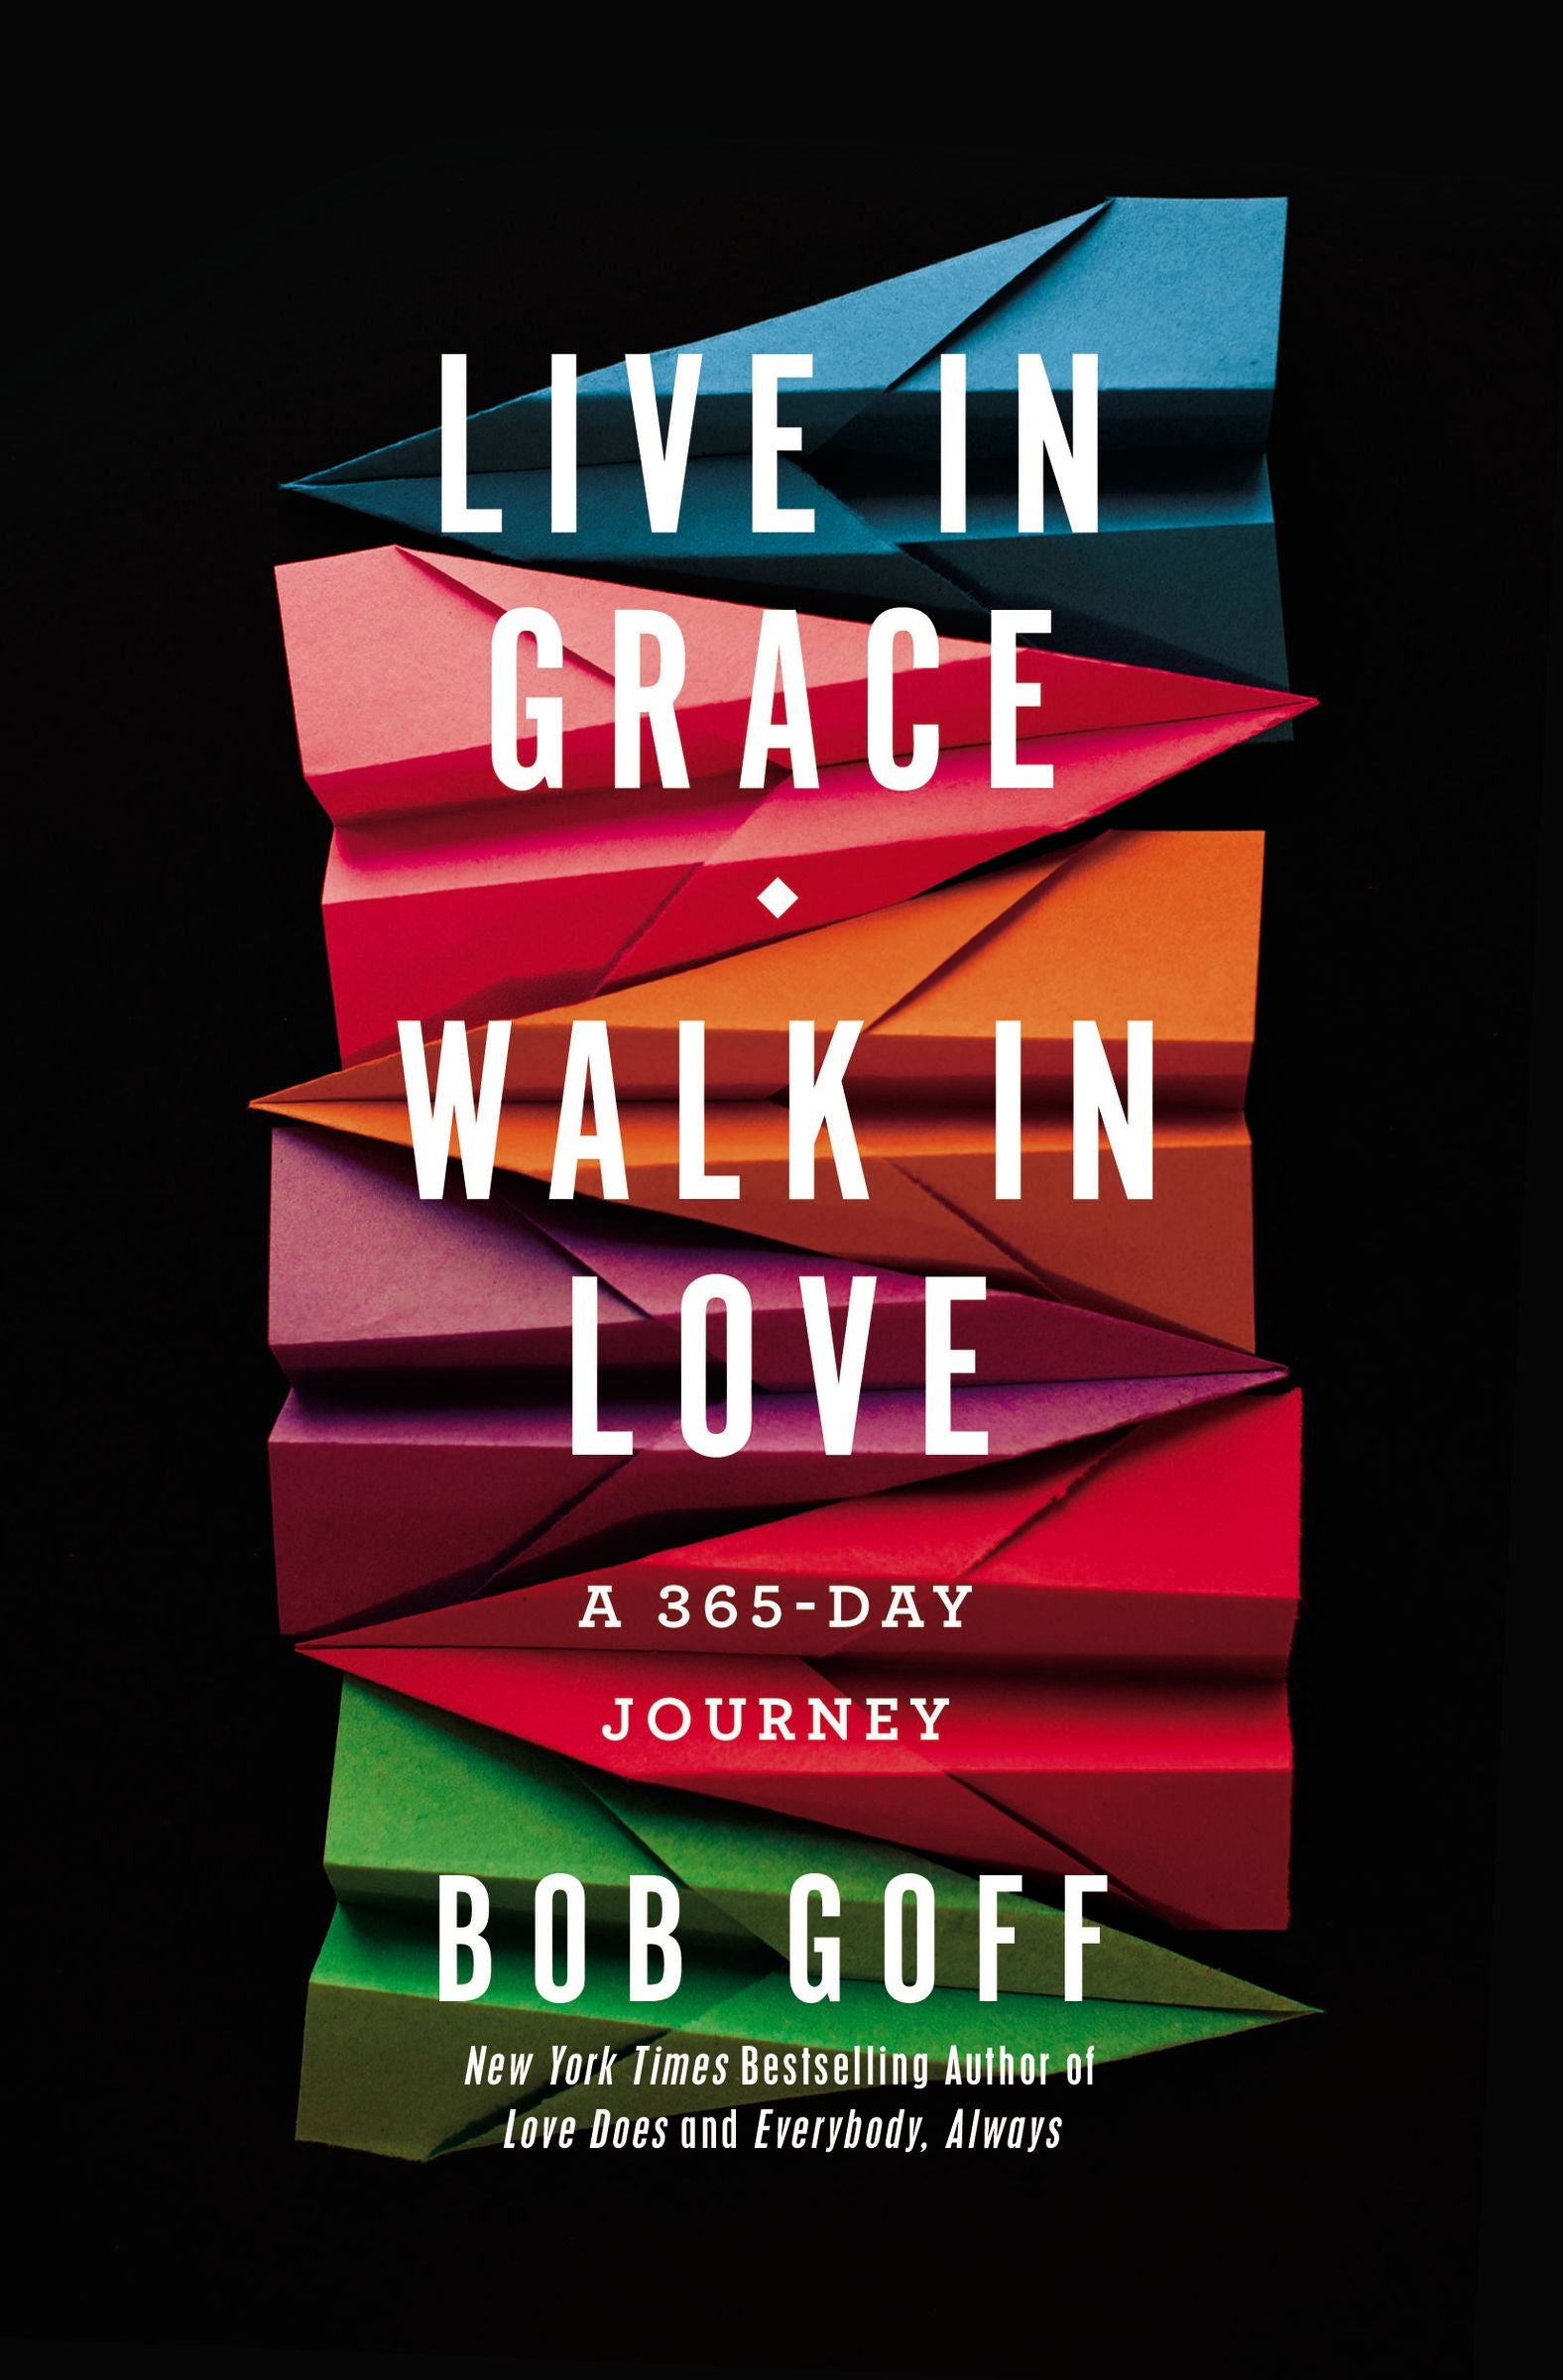 Image of Live in Grace, Walk in Love other